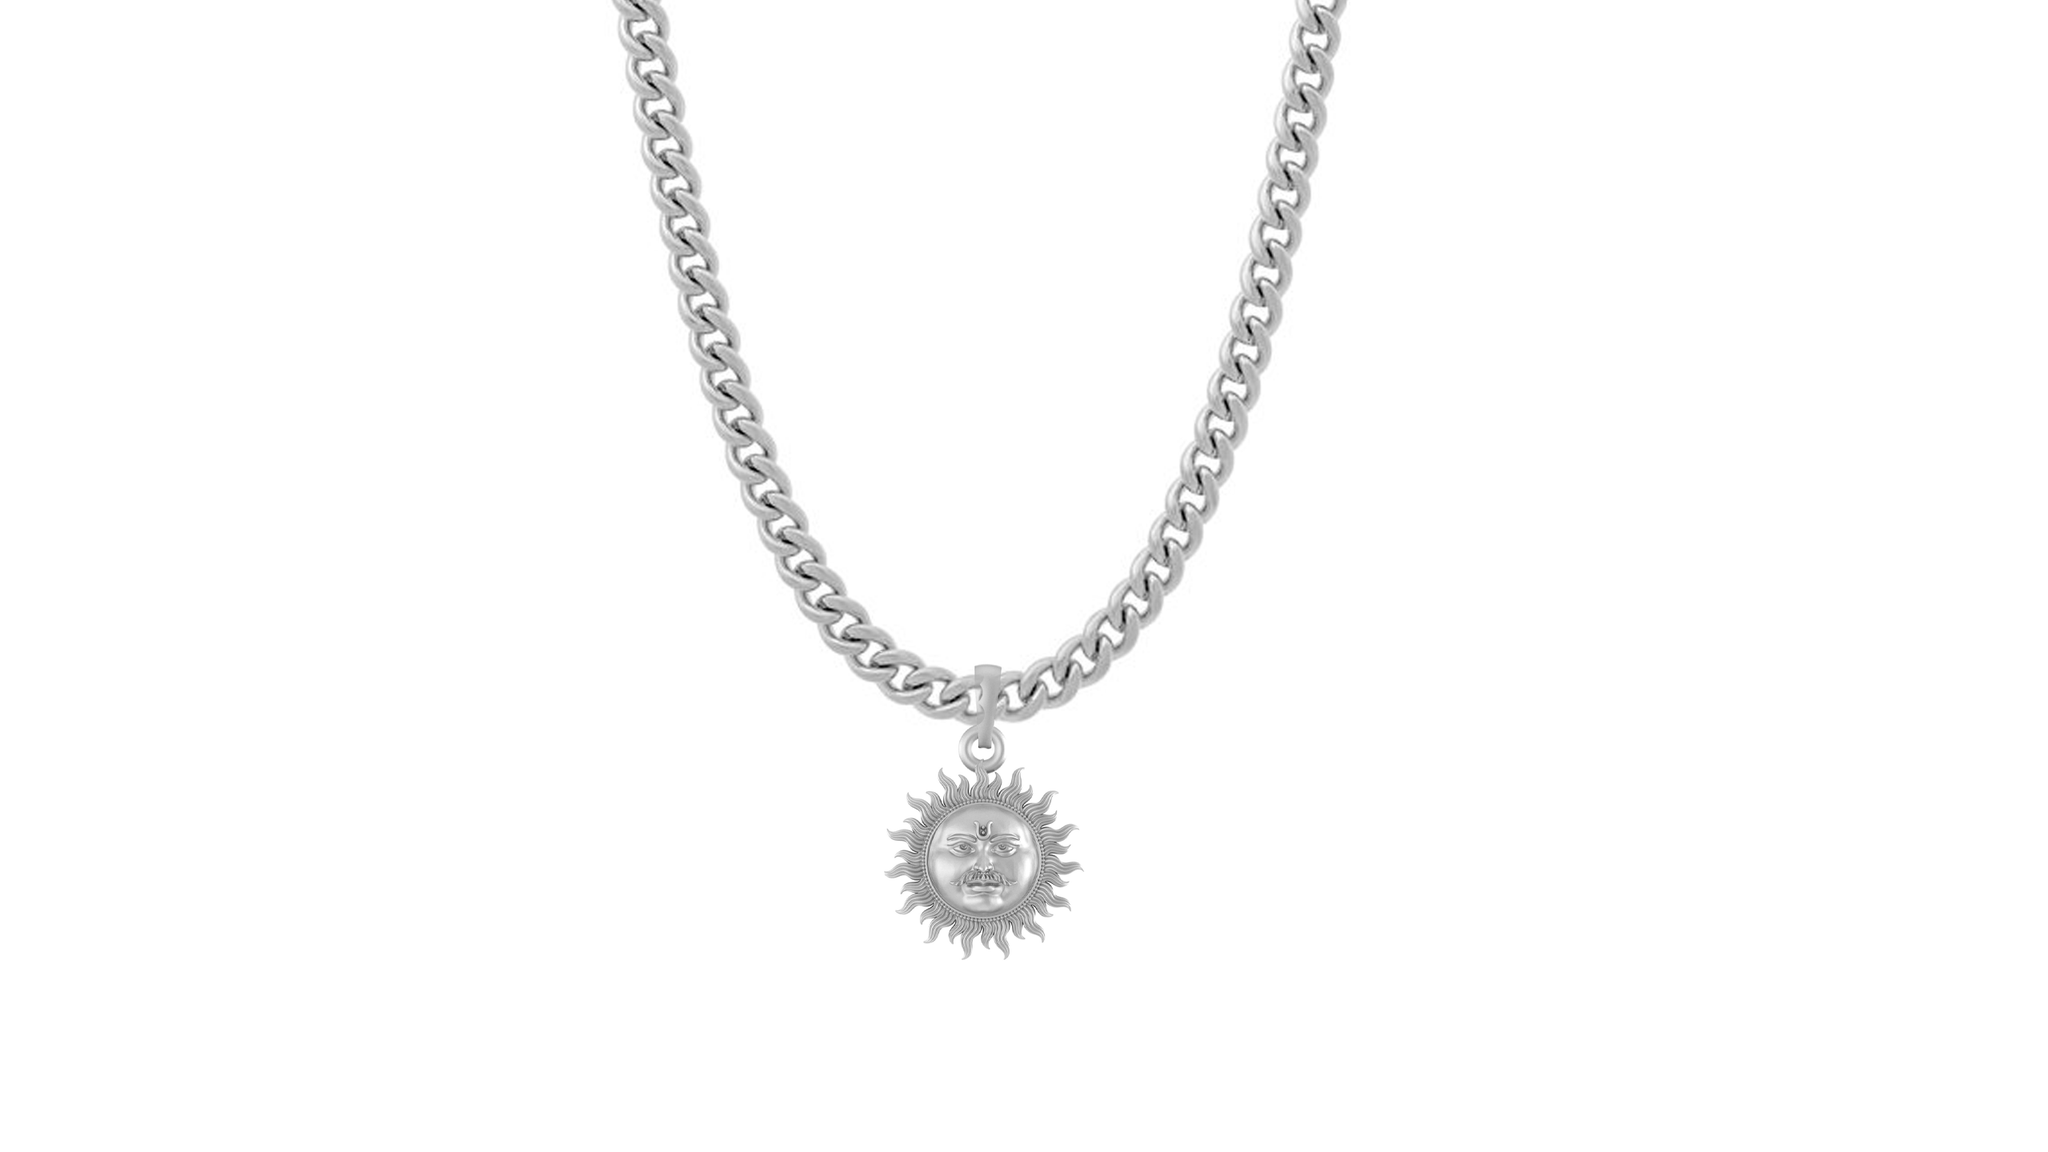 Akshat Sapphire Sterling Silver (92.5% purity) Divine God Sun Chain Pendant  (Pendant with Curb Chain-22 inches) for Men & Women Pure Silver Lord Surya Chain Locket for Good Health & Wealth Akshat Sapphire